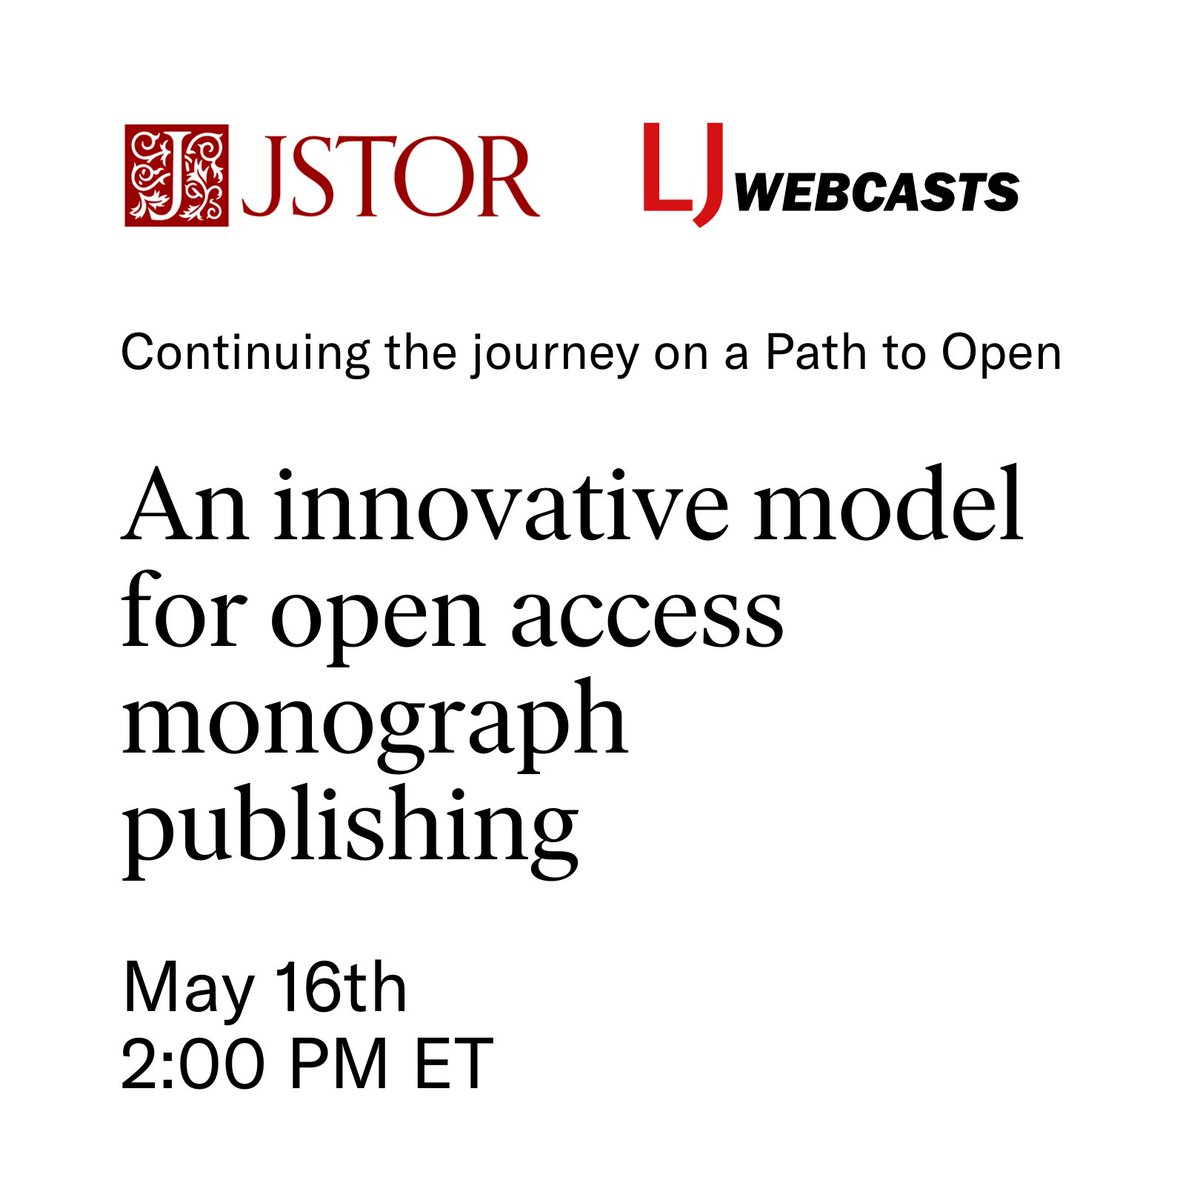 Join us, @LibraryJournal, and @ACLS1919 on May 16 from 2:00 PM to 3:00 PM ET for 'Continuing the Journey on a Path to Open: An Innovative Model for Open Access Monograph Publishing.' 🌱 Explore sustainable #OpenAccess models. Register: bit.ly/3W0ukhN